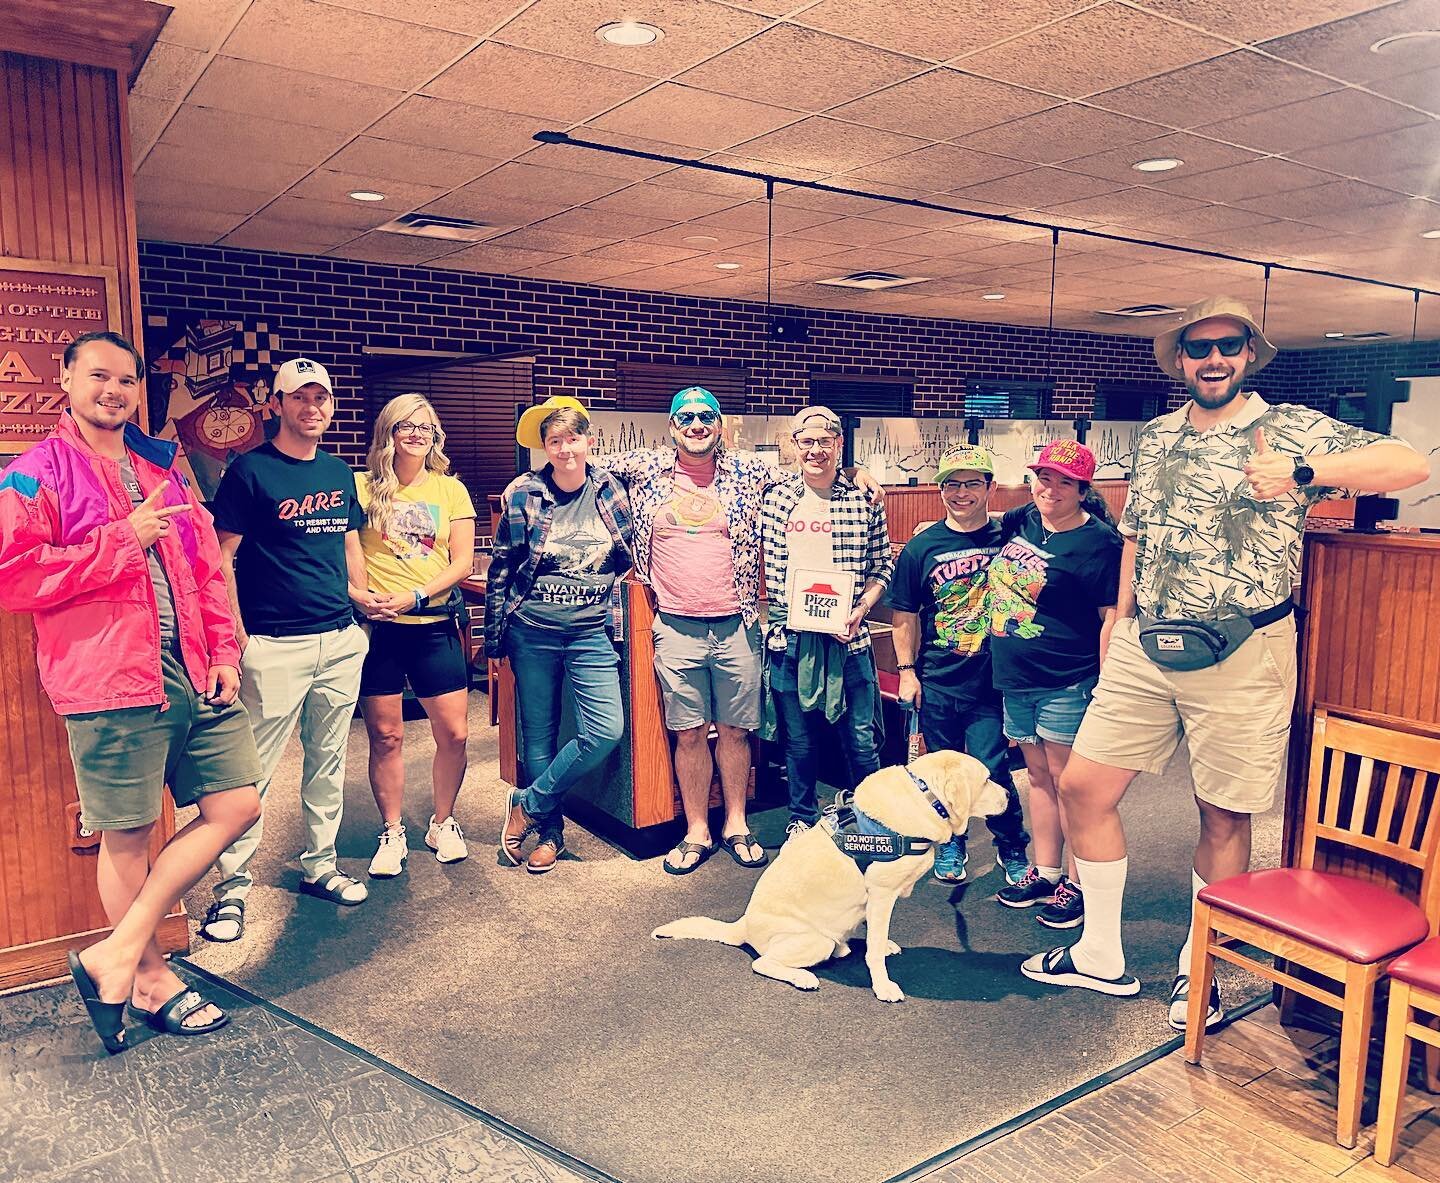 Party like it&rsquo;s 1995 and you just won your little league game! We had a blast grabbing slices at Pizza Hut with the Annapolis Jaycees crew for our 90s themed pizza night. 

We hope to see you at our next event. Check our stories and highlight r